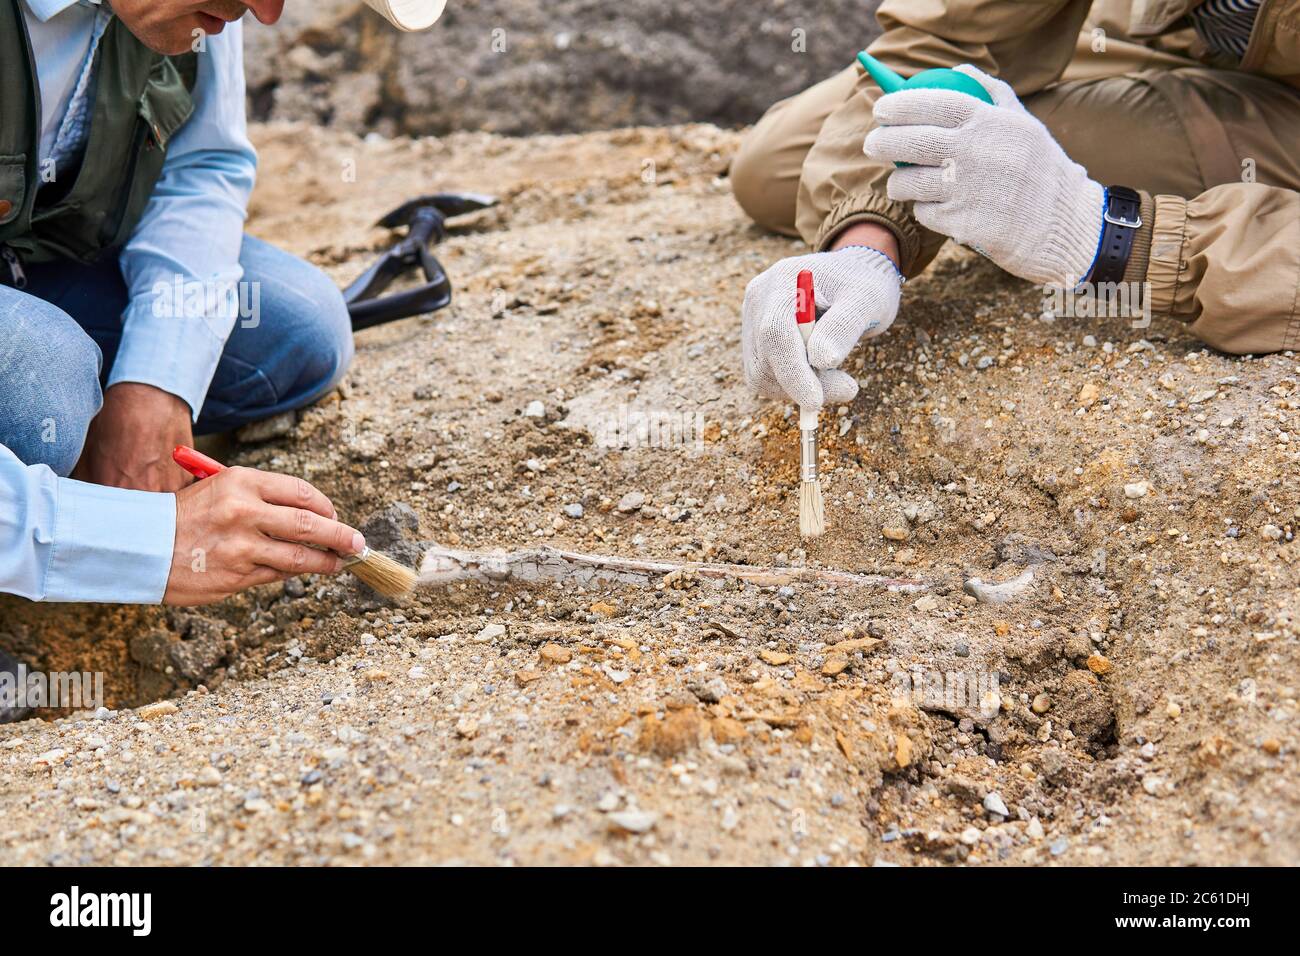 hands of paleontologists cleaning the fossil bone found in the desert Stock Photo